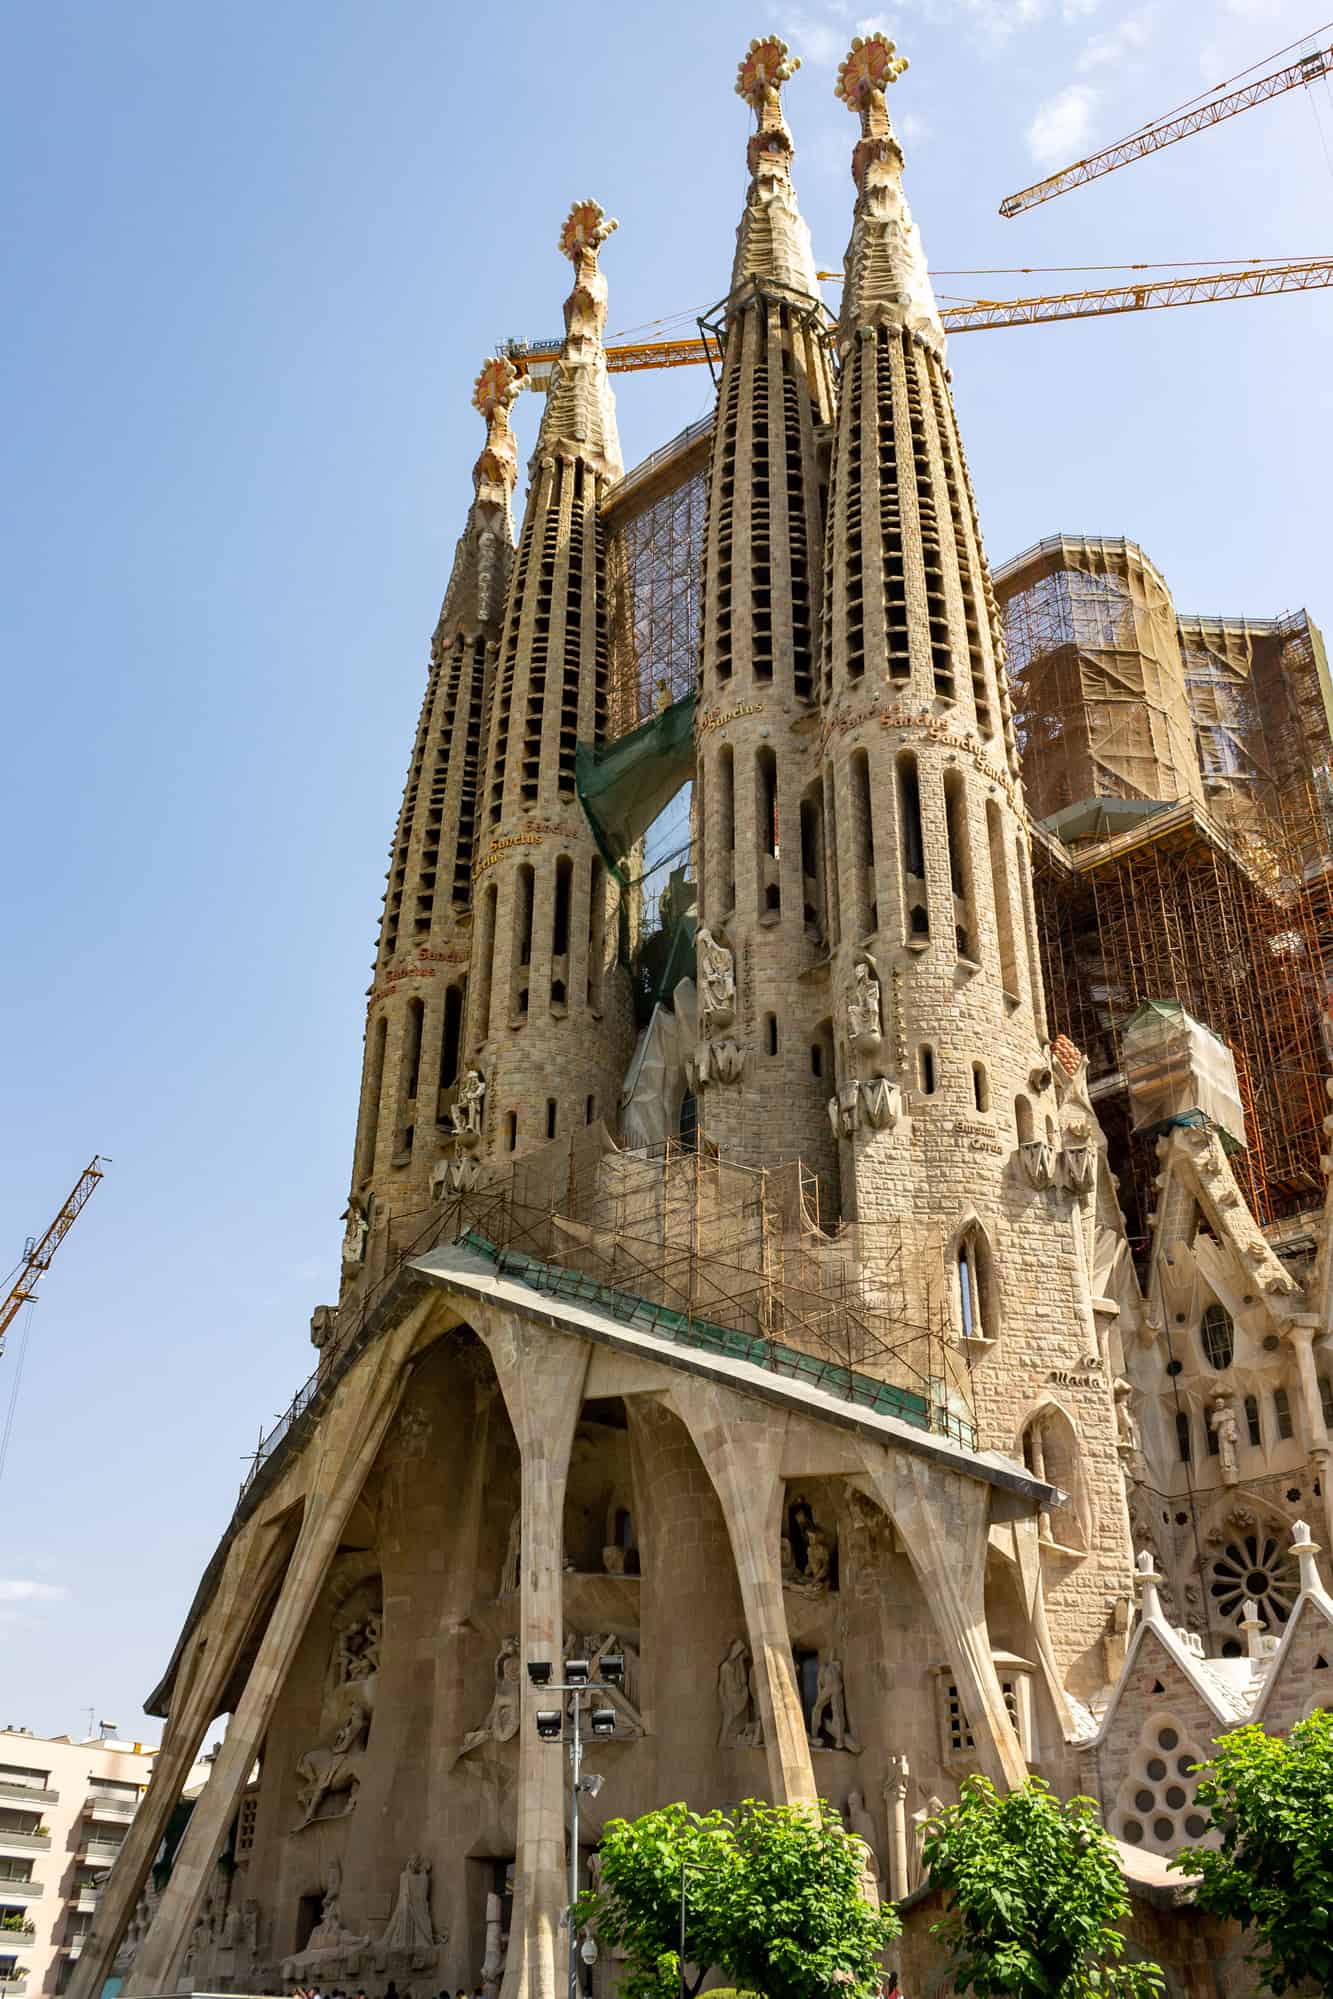 Vertical shot of the Sagrada Familia basilica and its tall towers under construction